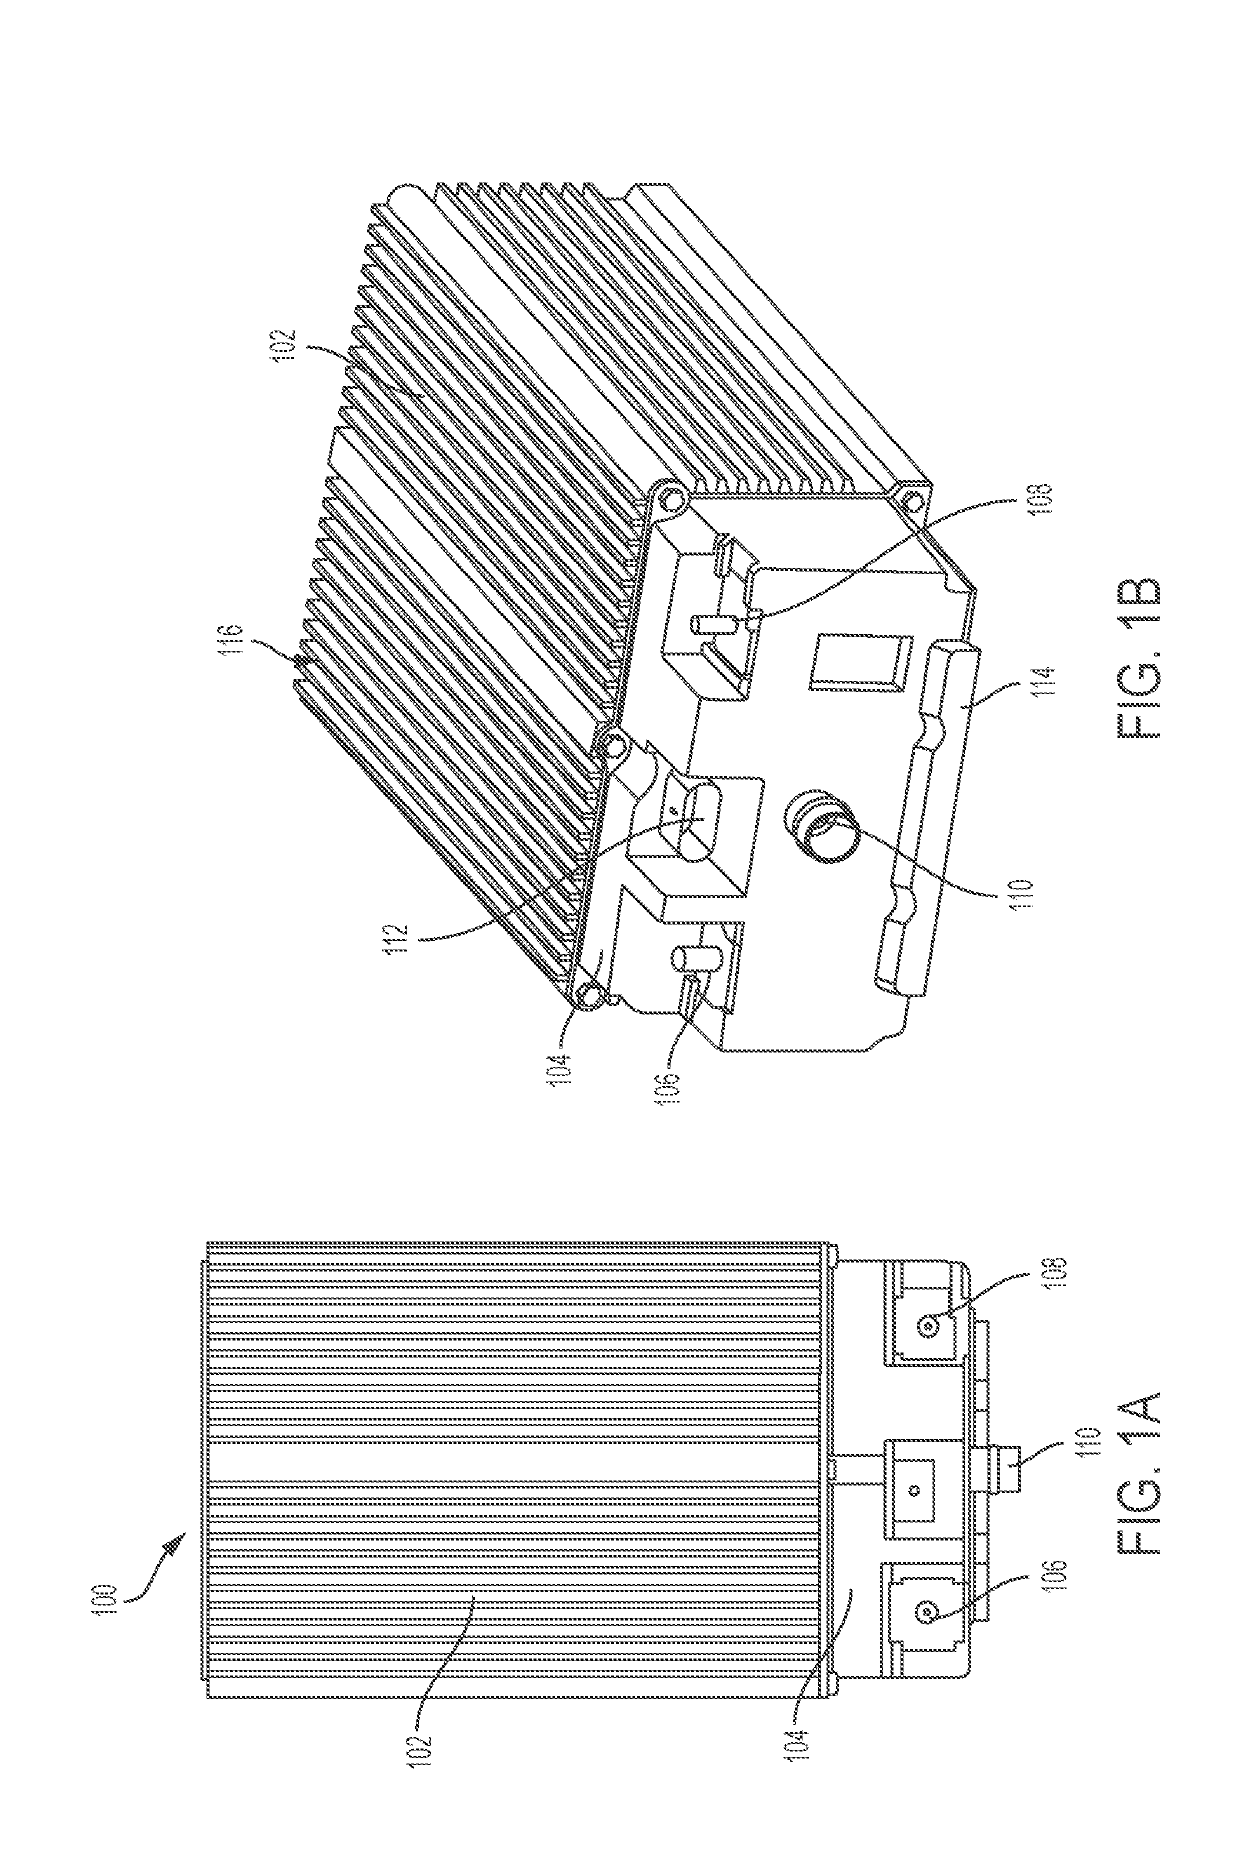 Battery module with heat dissipating encapsulant material and methods therefor